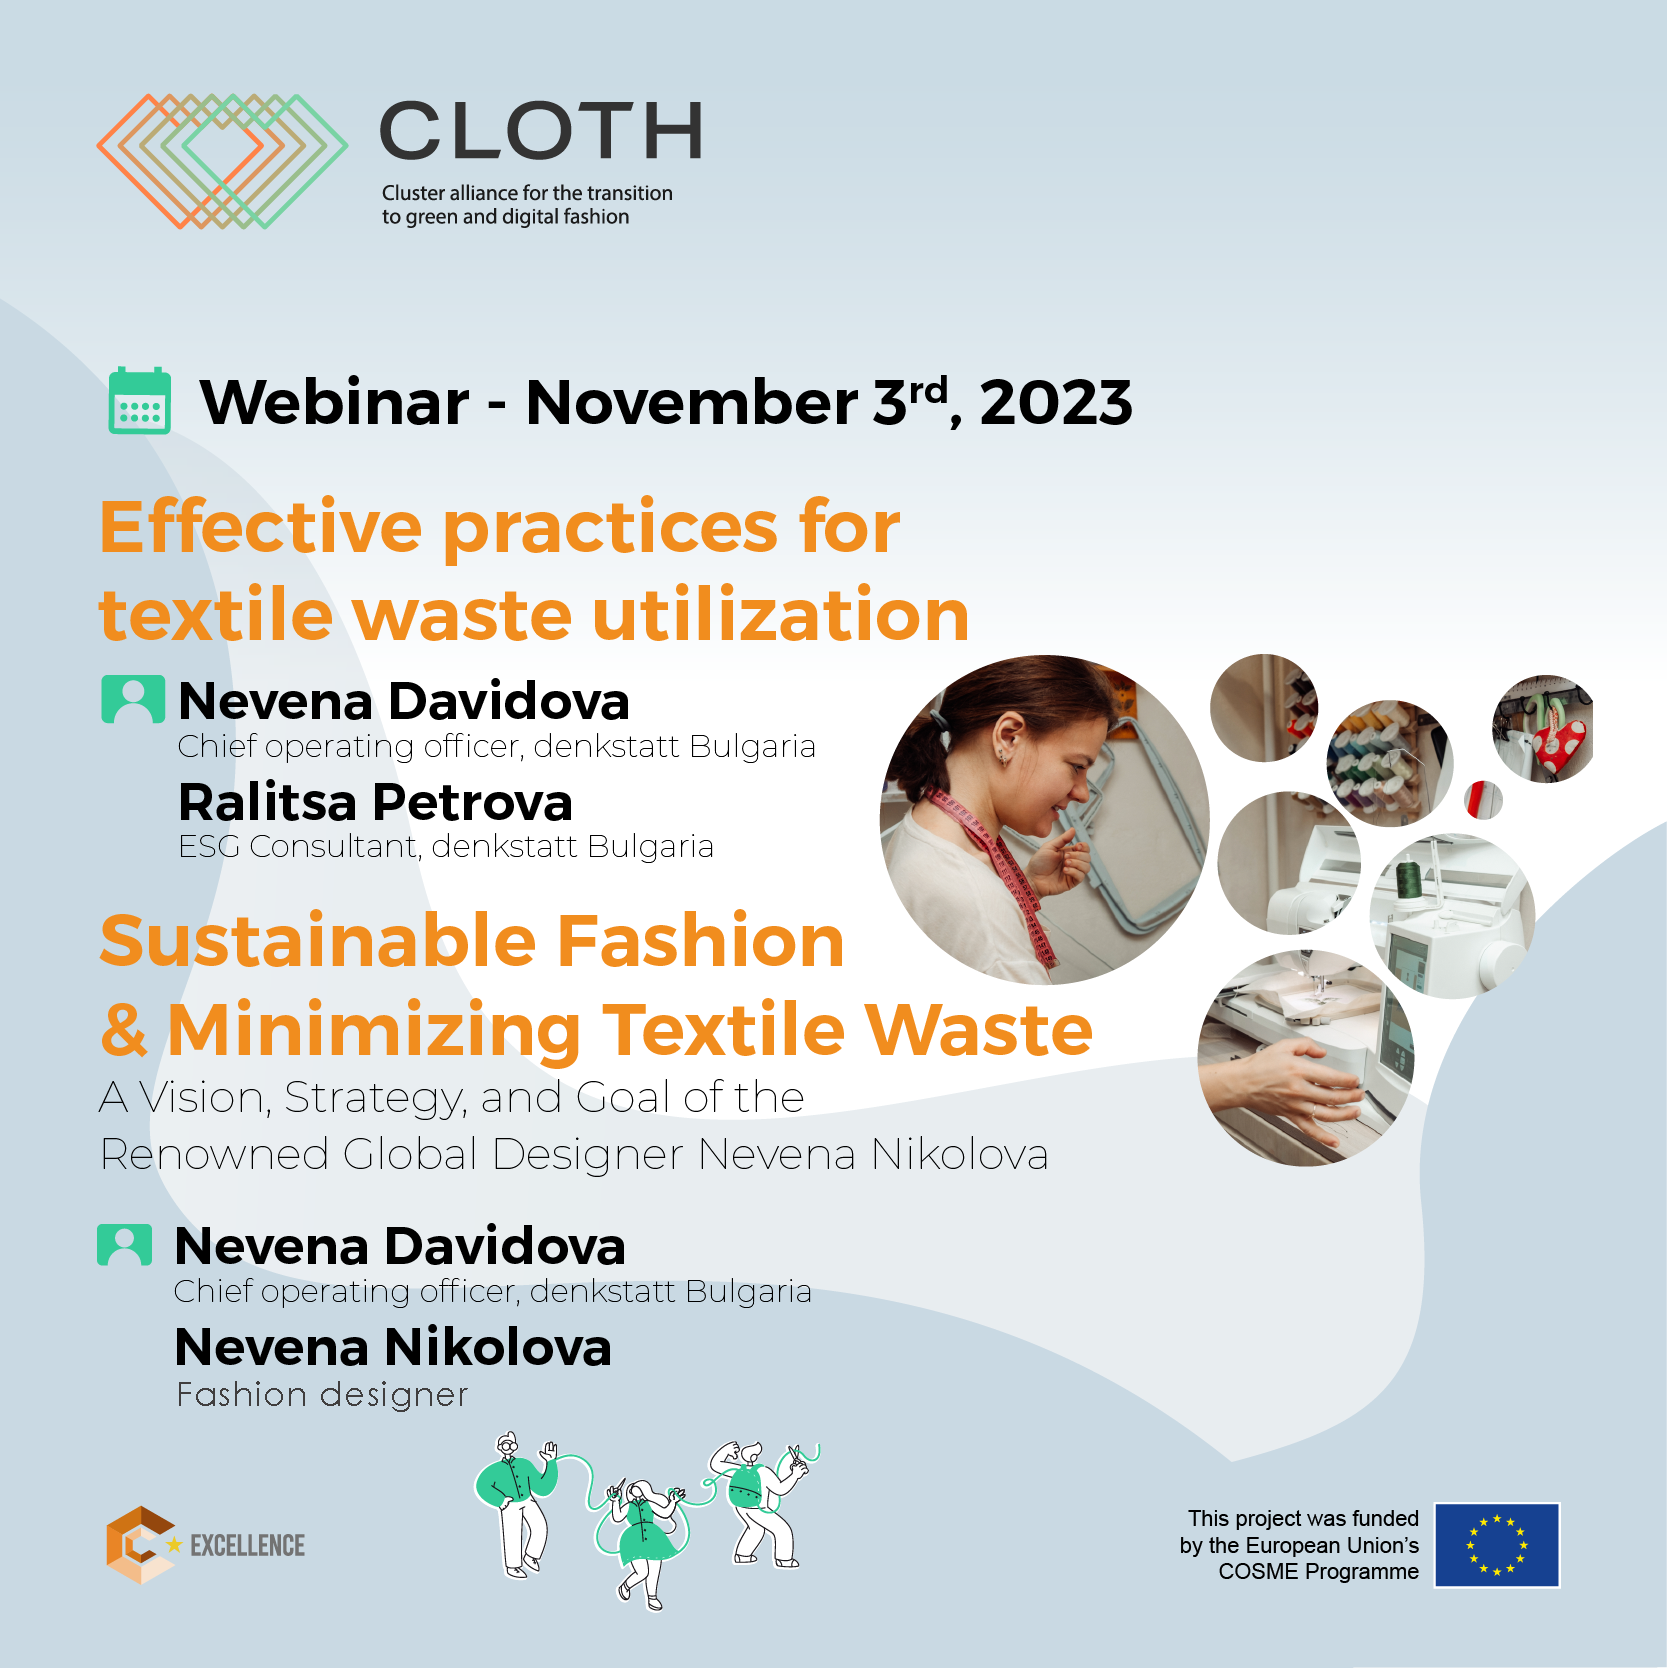 Training: Textiles – between fashion, reuse, and textile recovery?